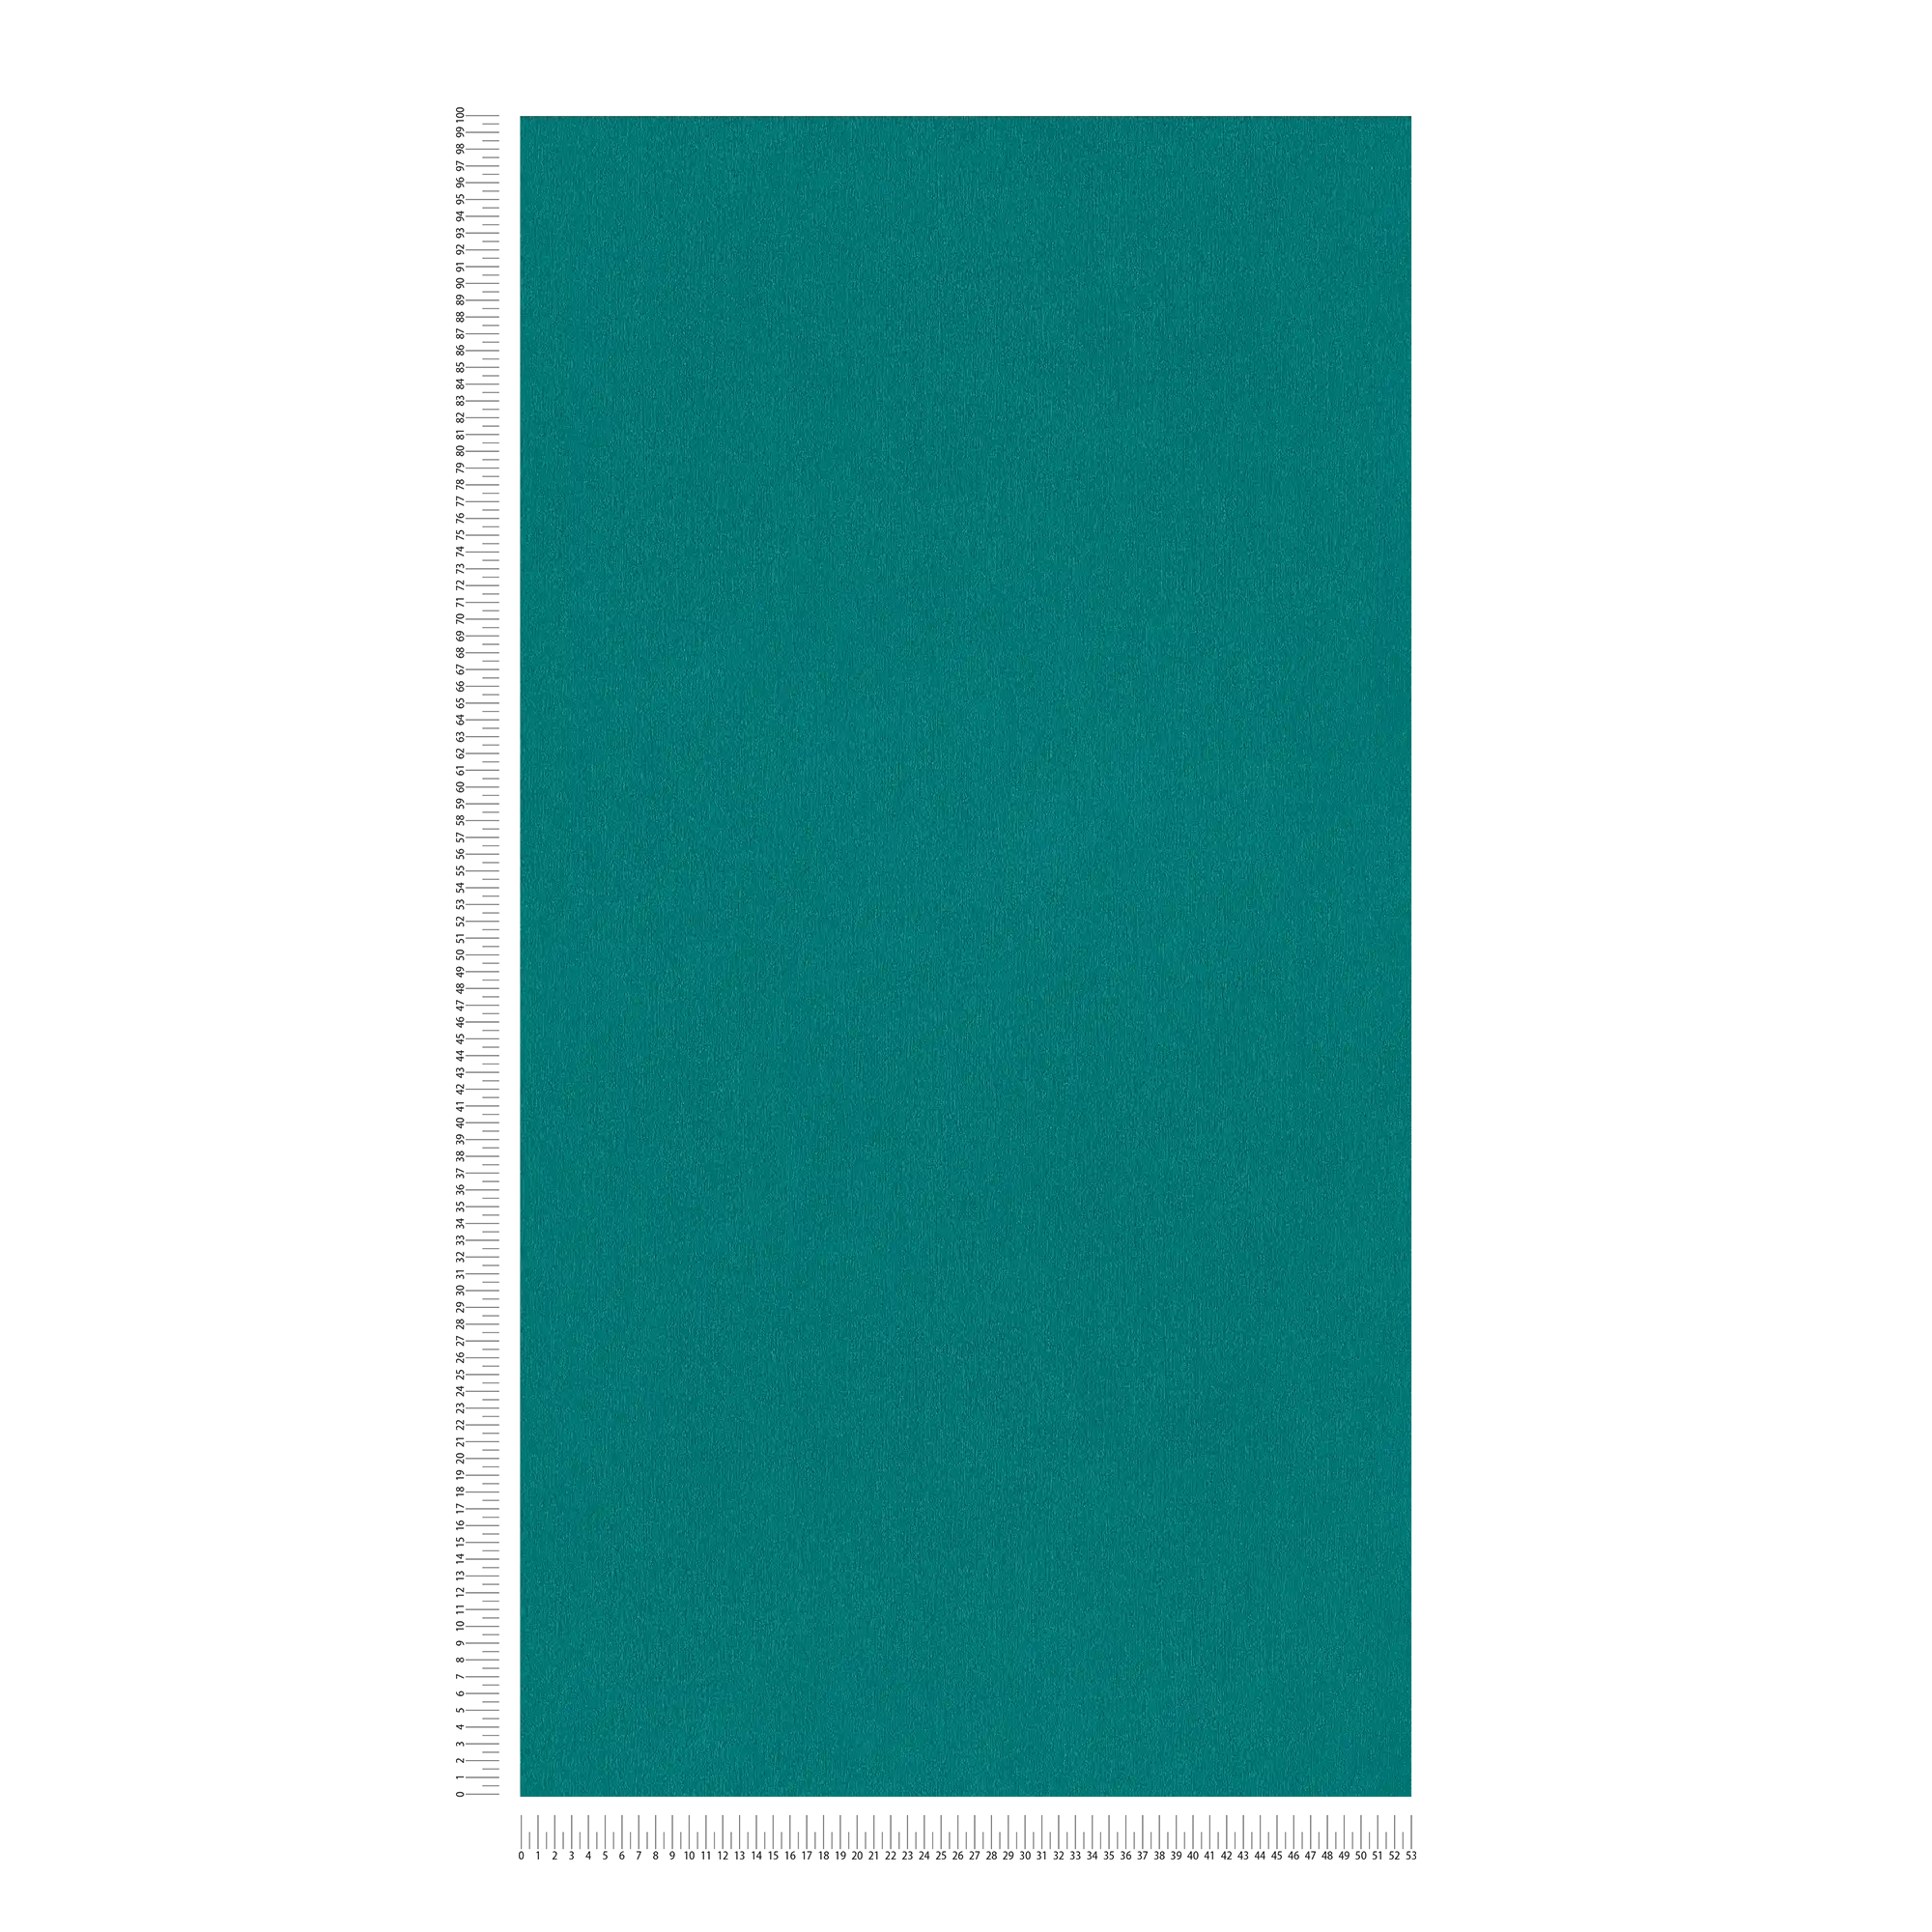             Turquoise wallpaper petrol green with colour texture
        